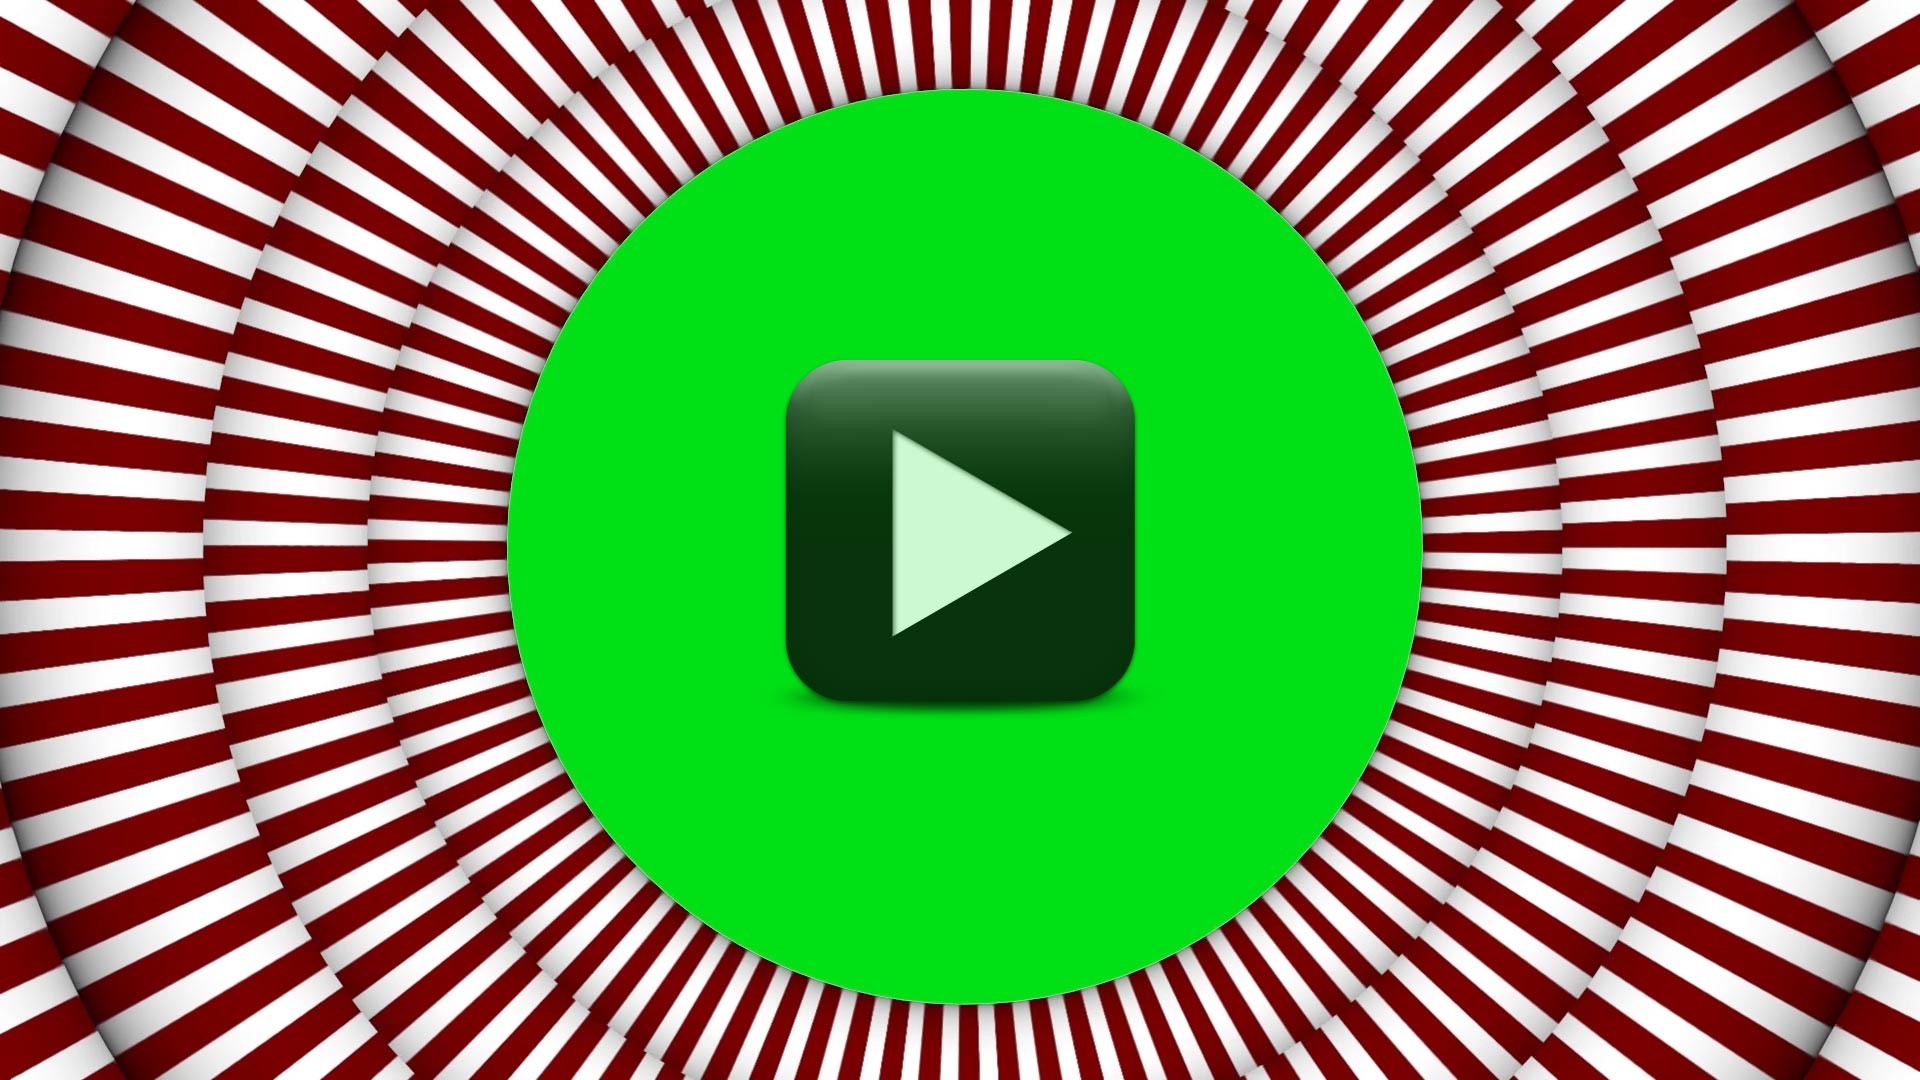 1920x1080 Hypnotic Circle Background-Green Screen Hypnosis Animation Frame | All  Design Creative